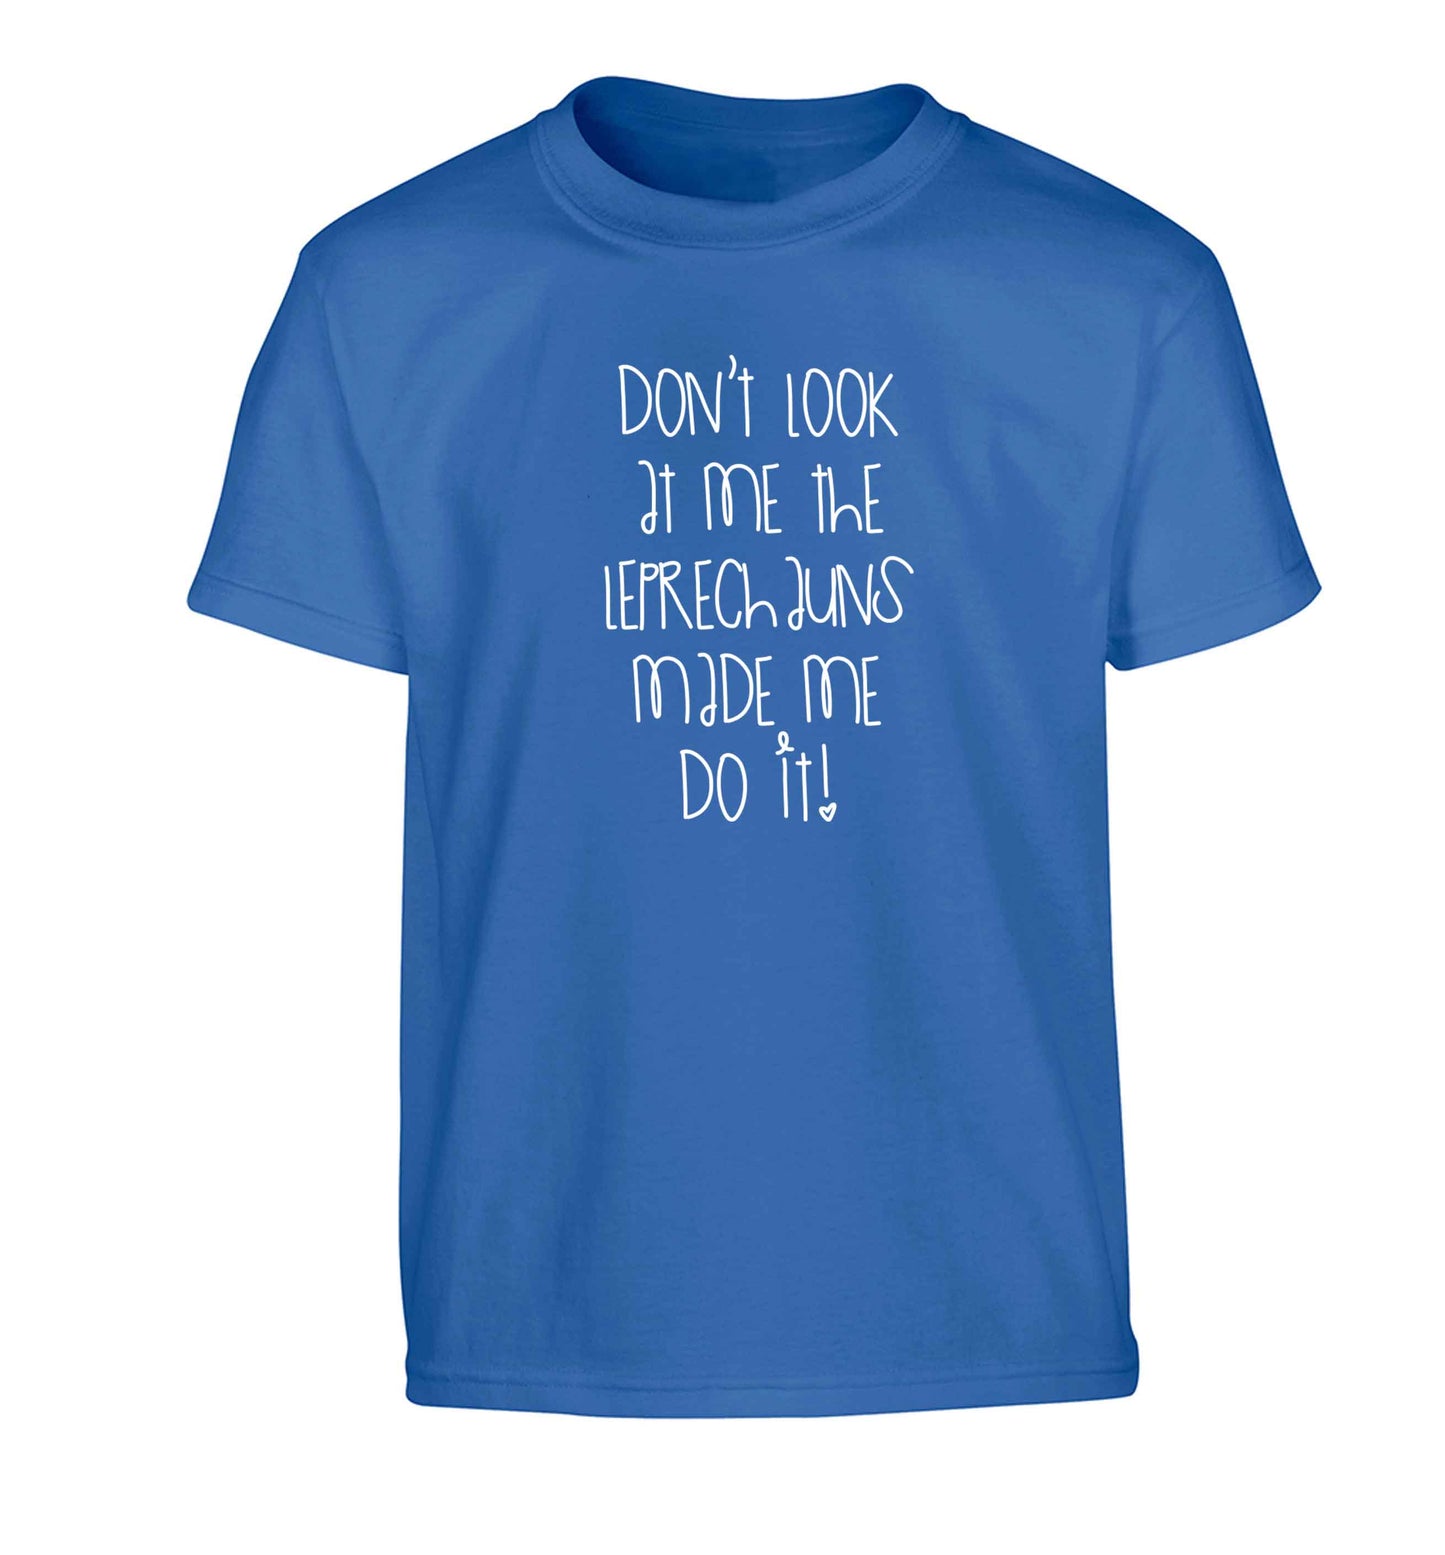 Don't look at me the leprechauns made me do it Children's blue Tshirt 12-13 Years